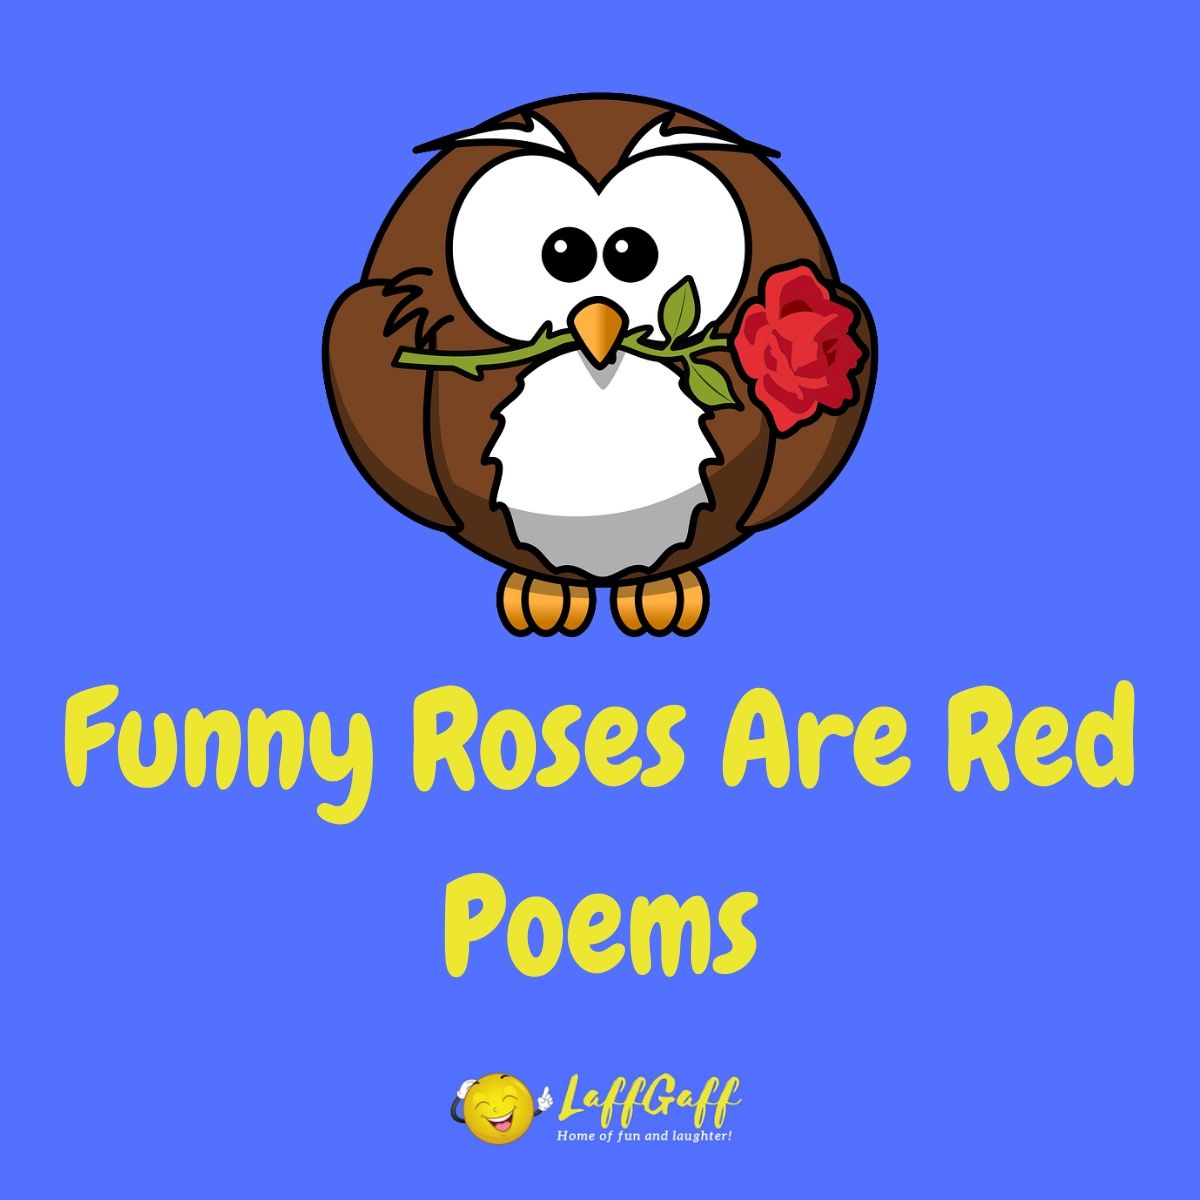 Violets roses jokes blue are red are poems 42 Roses